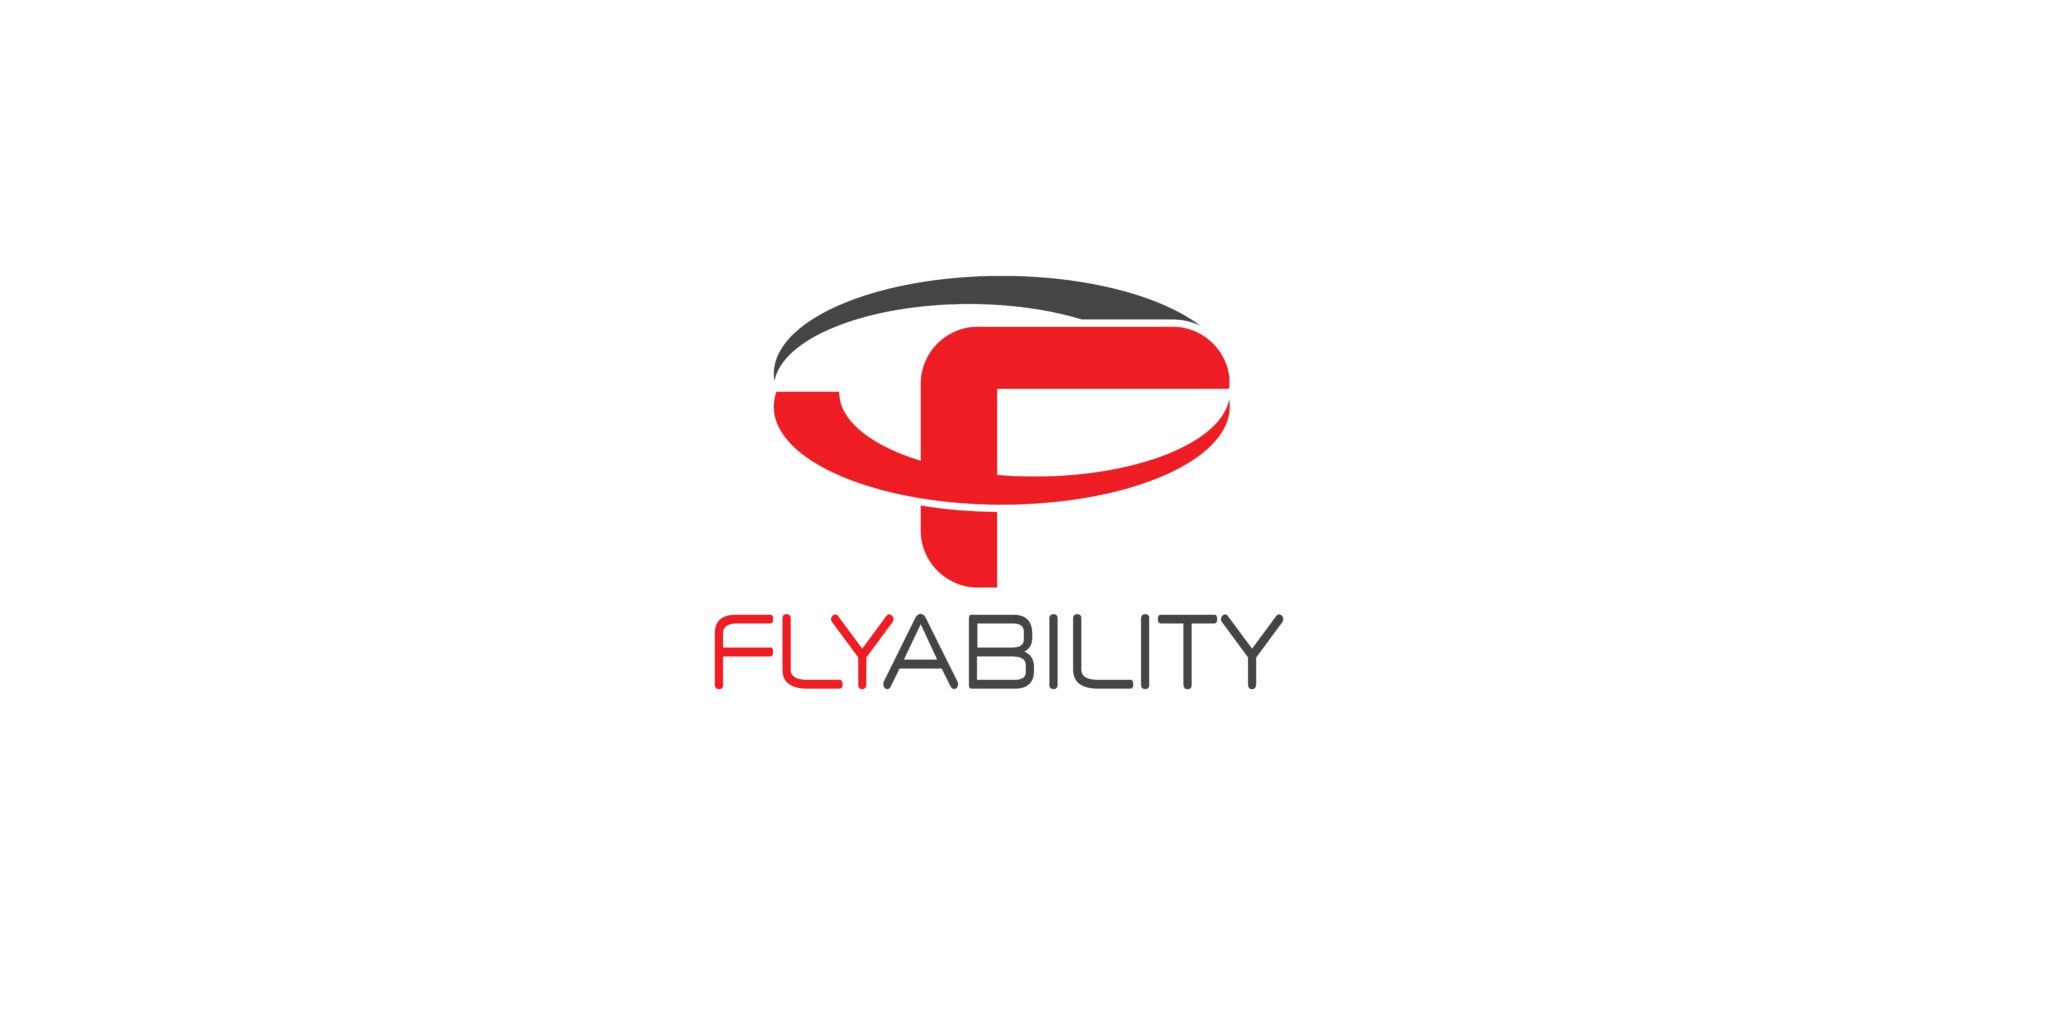 DJI and Flyability partner to bring collision-tolerance to UAVs